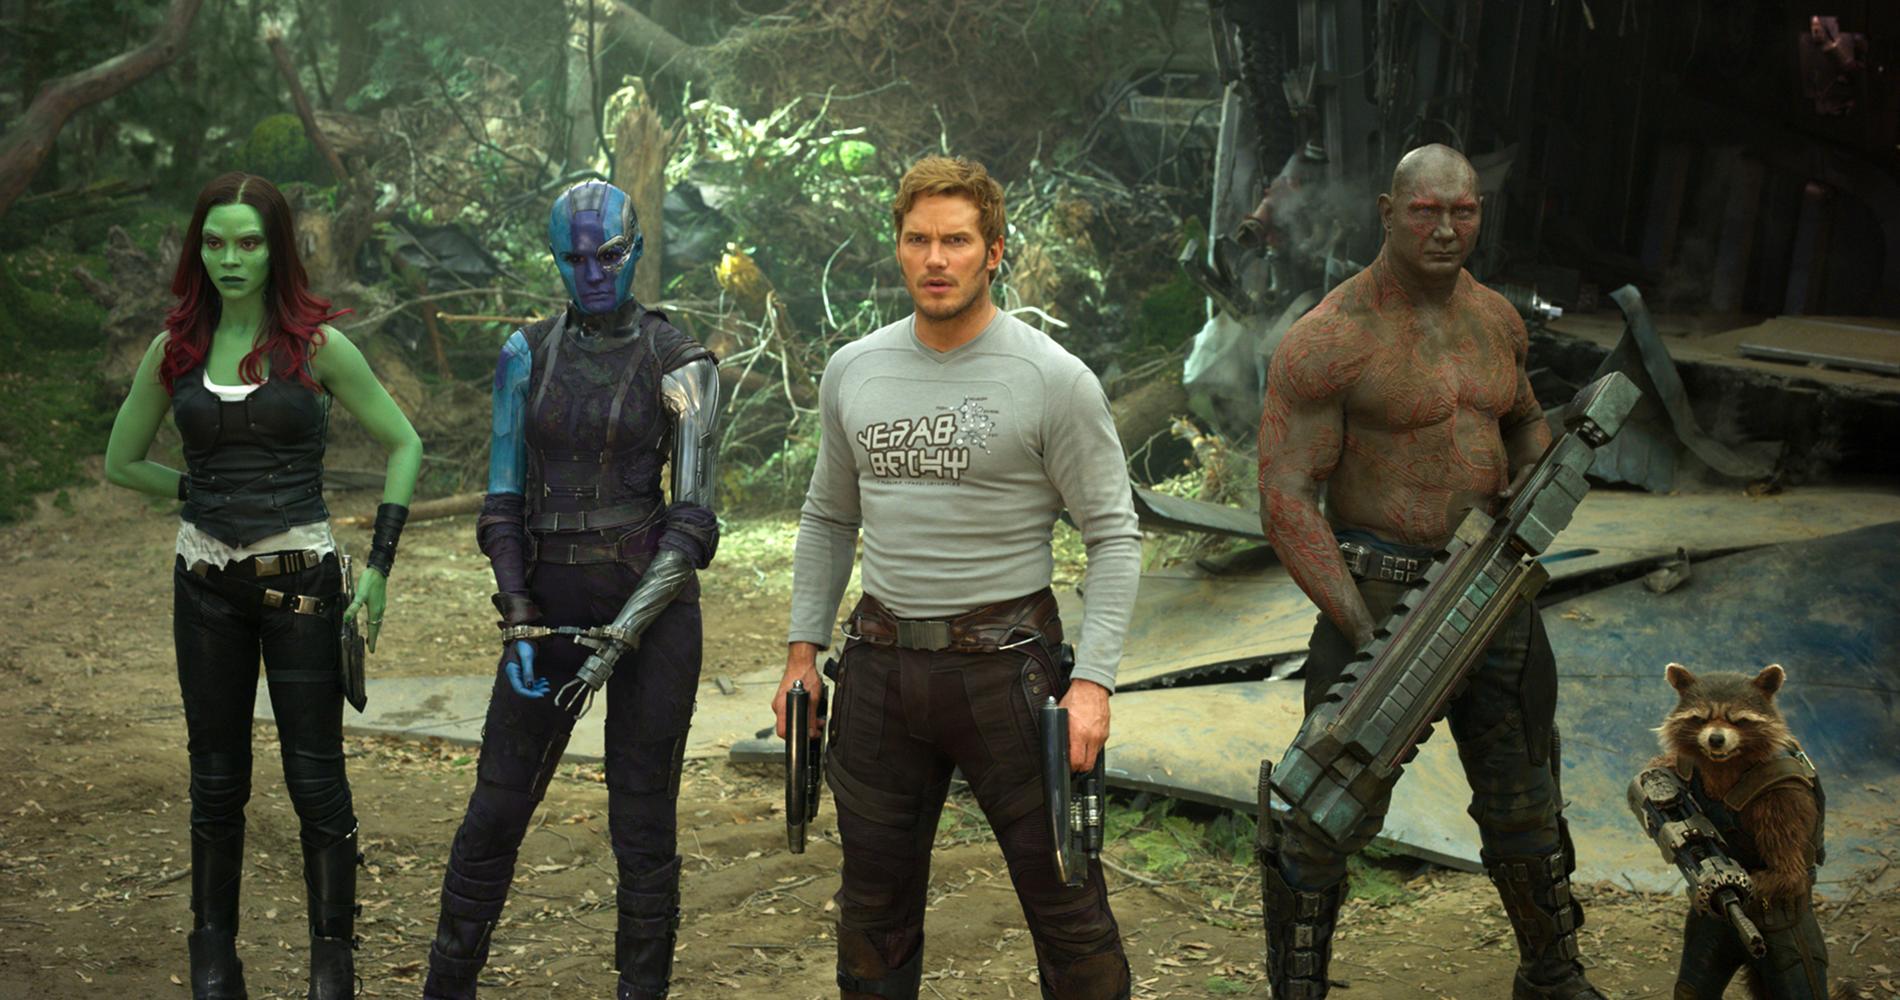 ”Guardians of the Galaxy 2”.